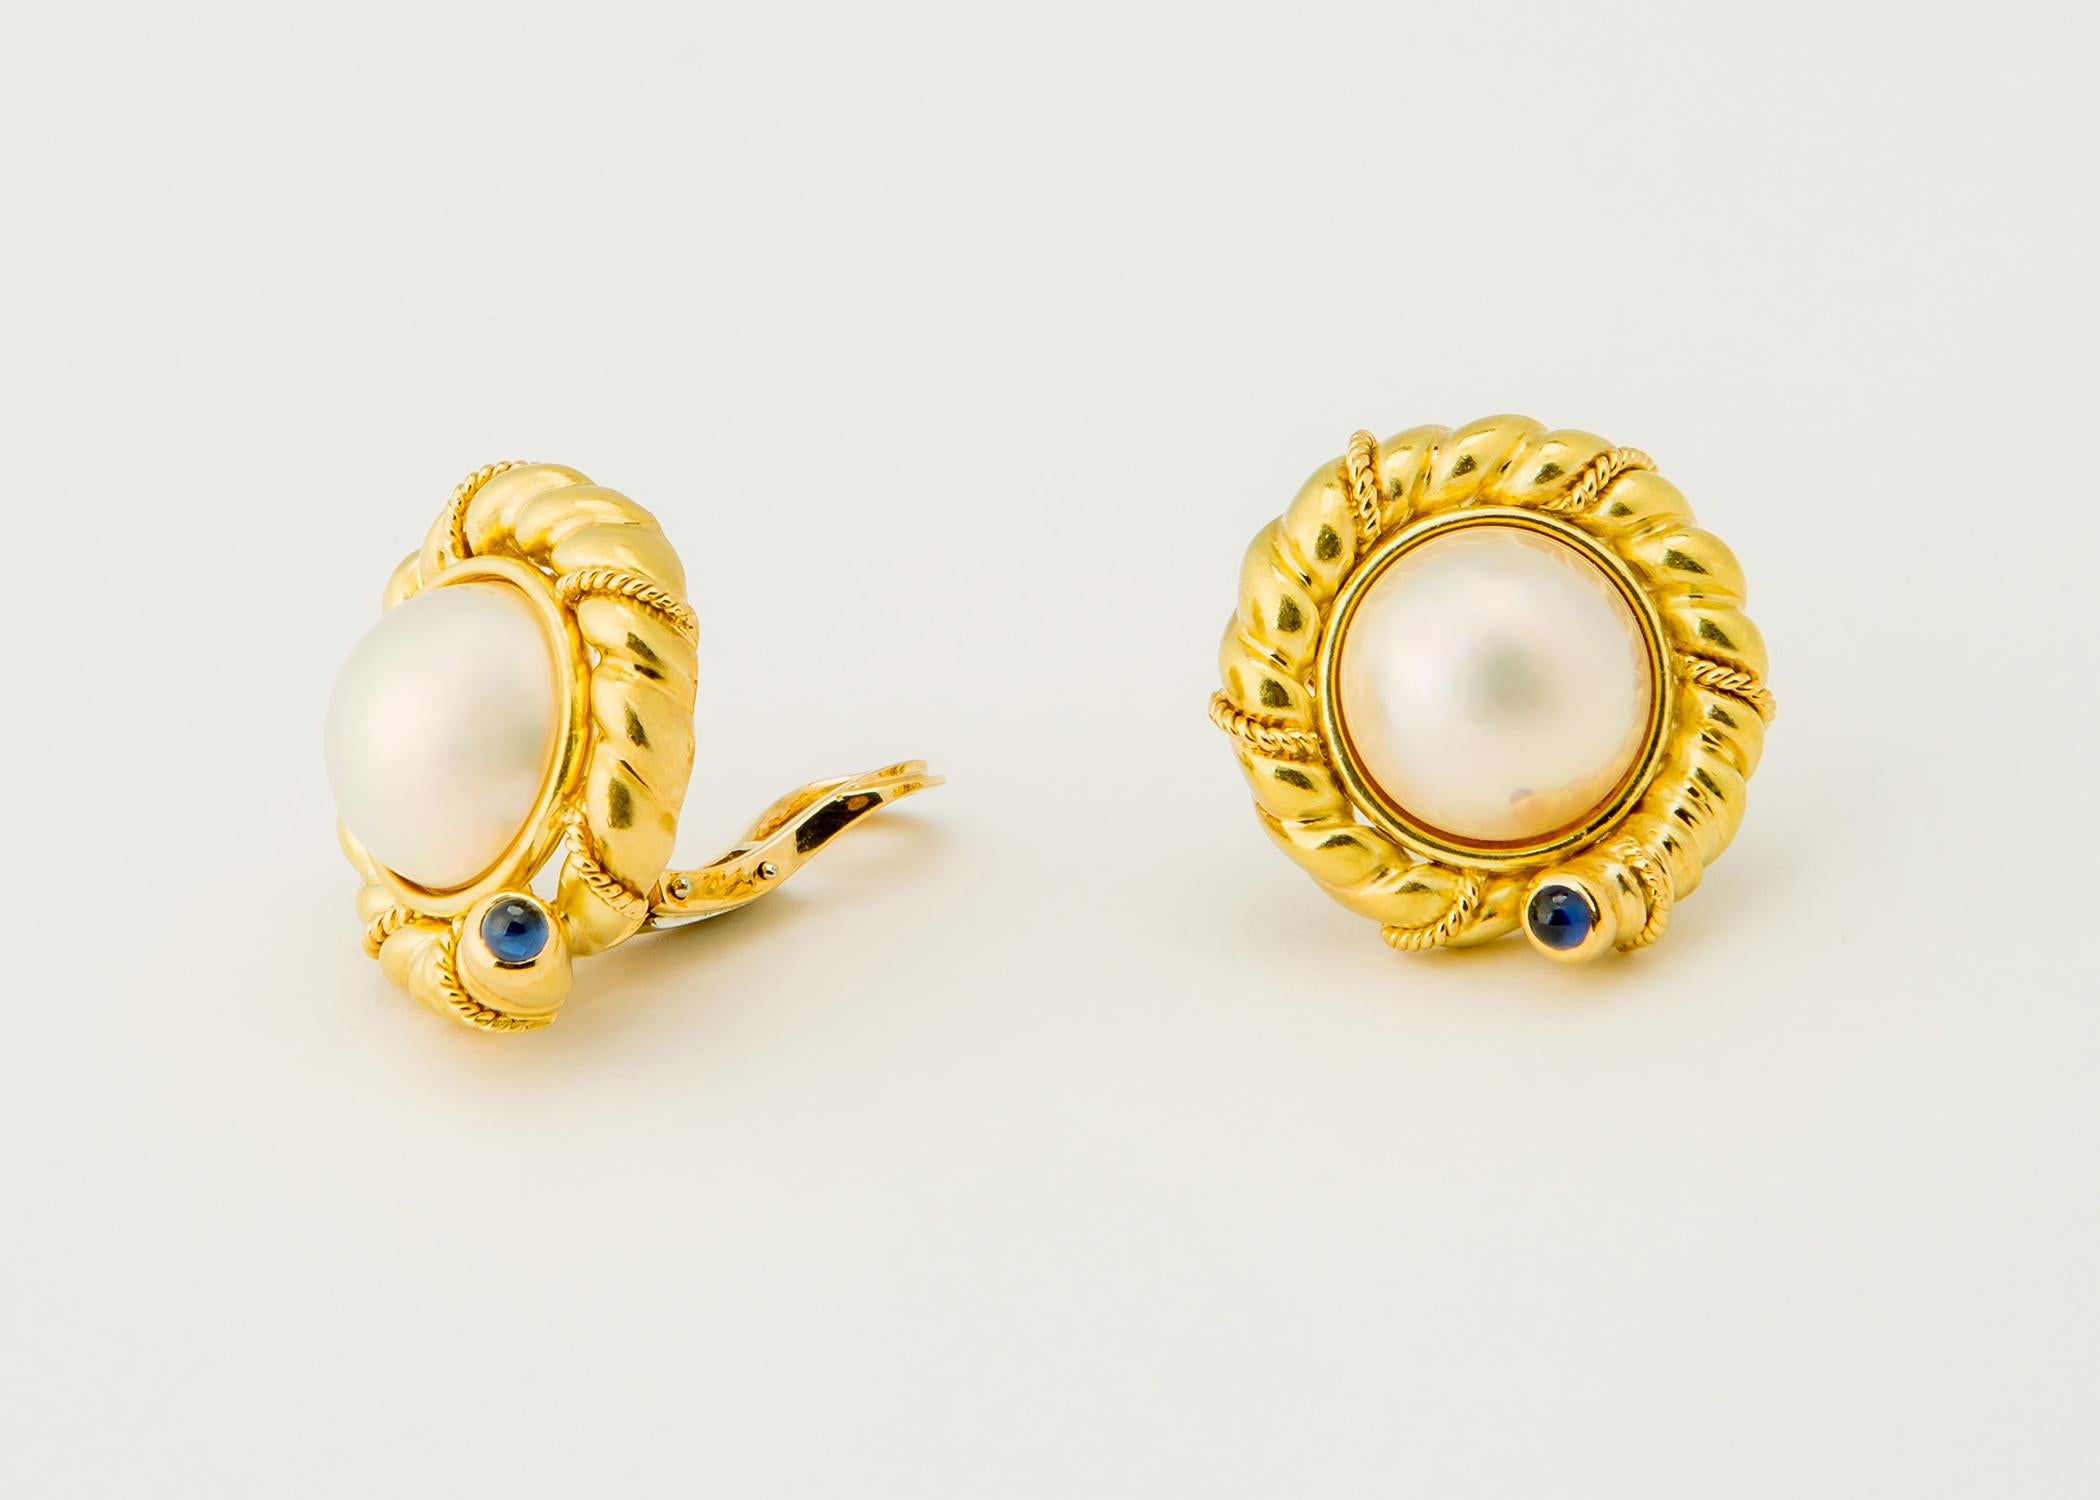 Contemporary Tiffany & Co. Pearl and Sapphire Earrings